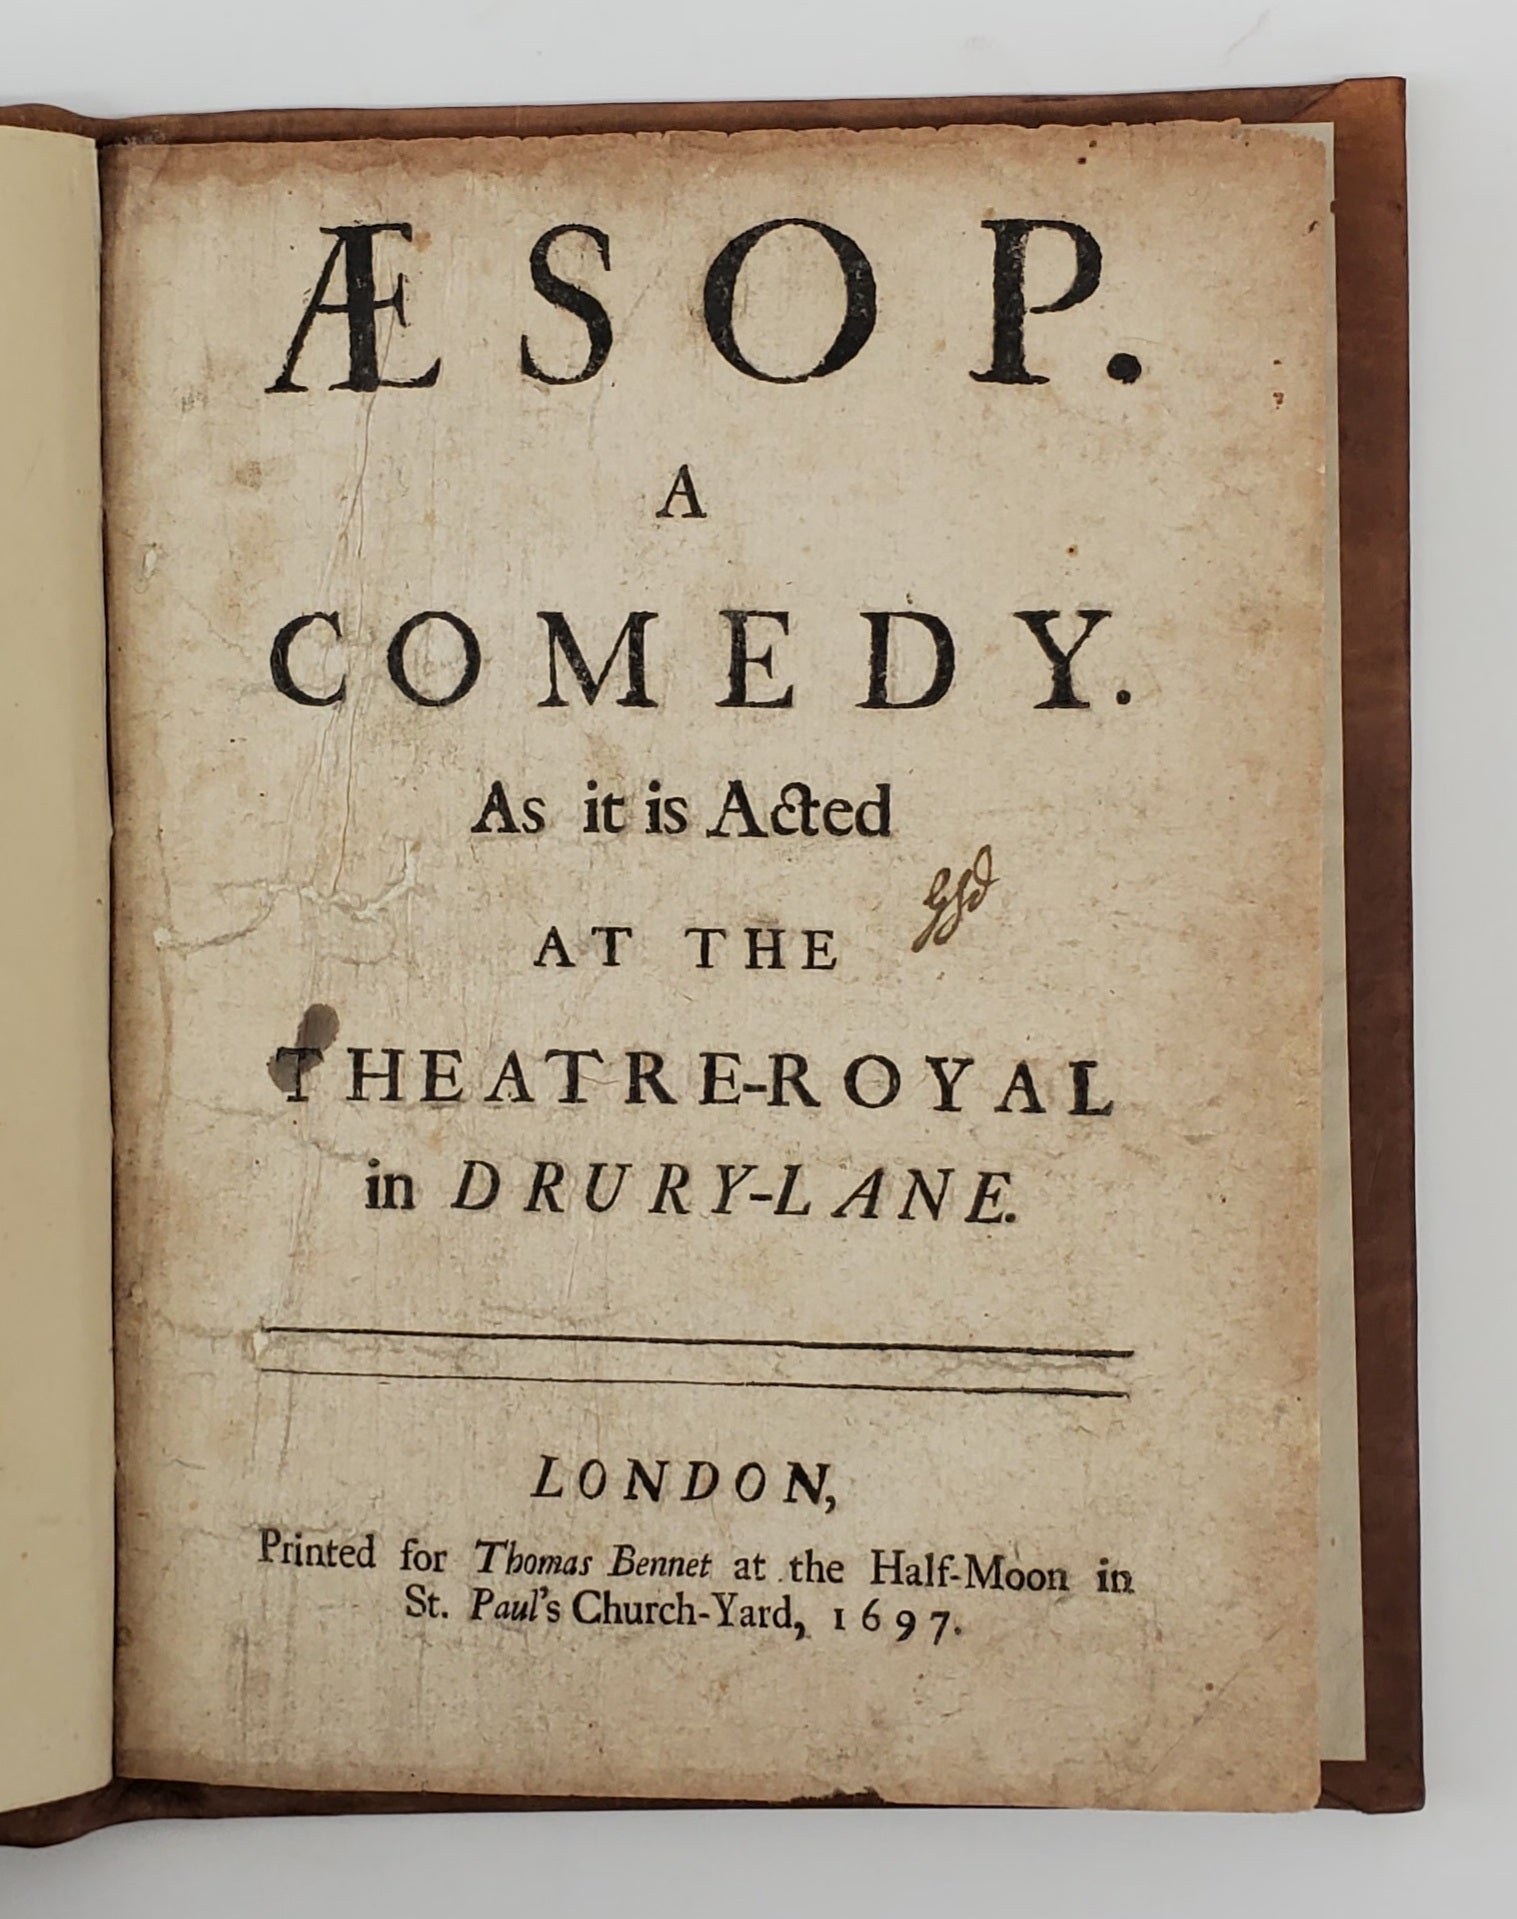 Product Image for ÆSOP. A COMEDY. AS IT IS ACTED AT THE THEATRE-ROYAL IN DRURY-LANE